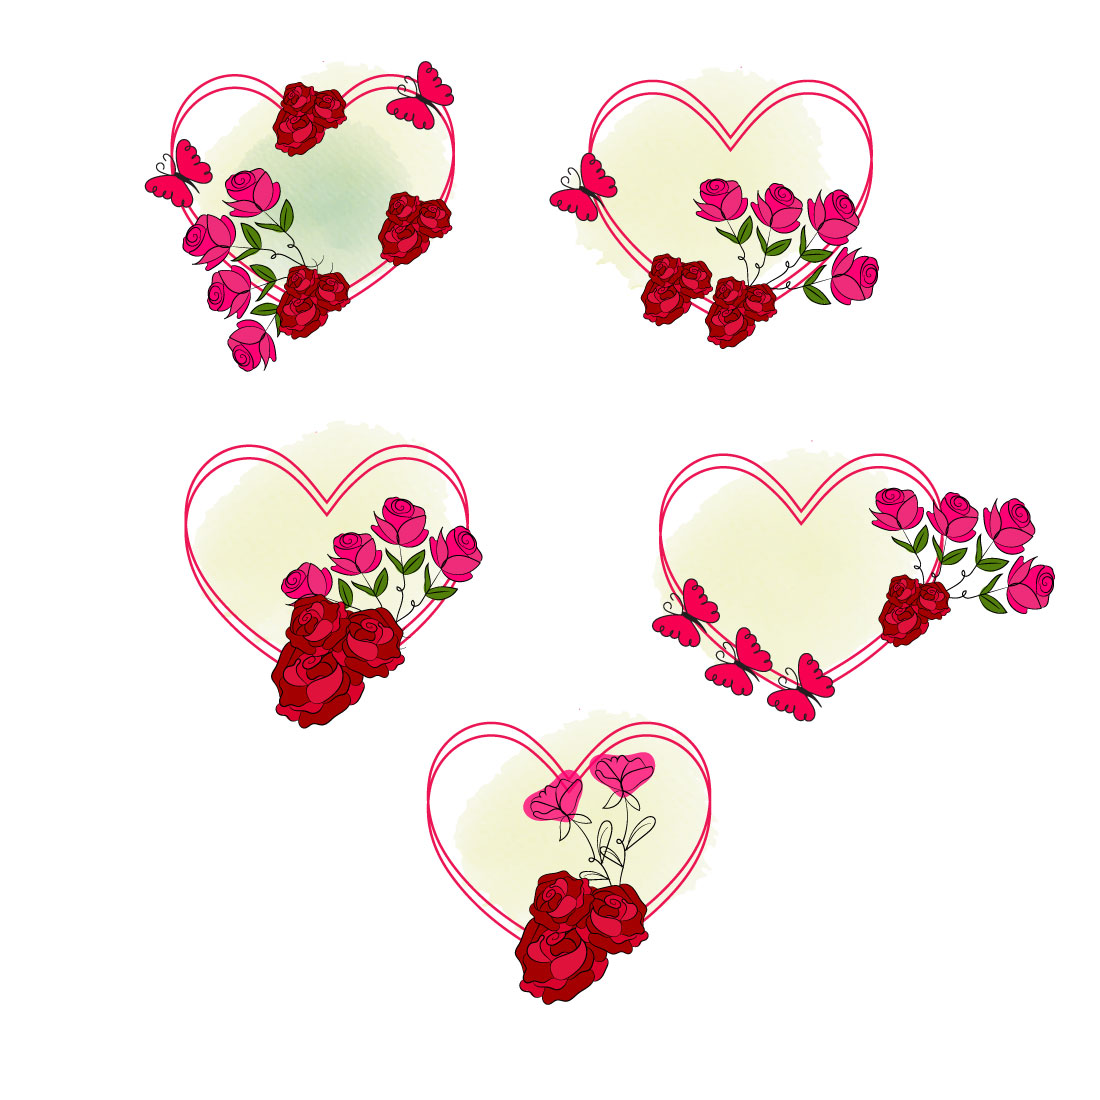 Heart Shaped Frame cover image.